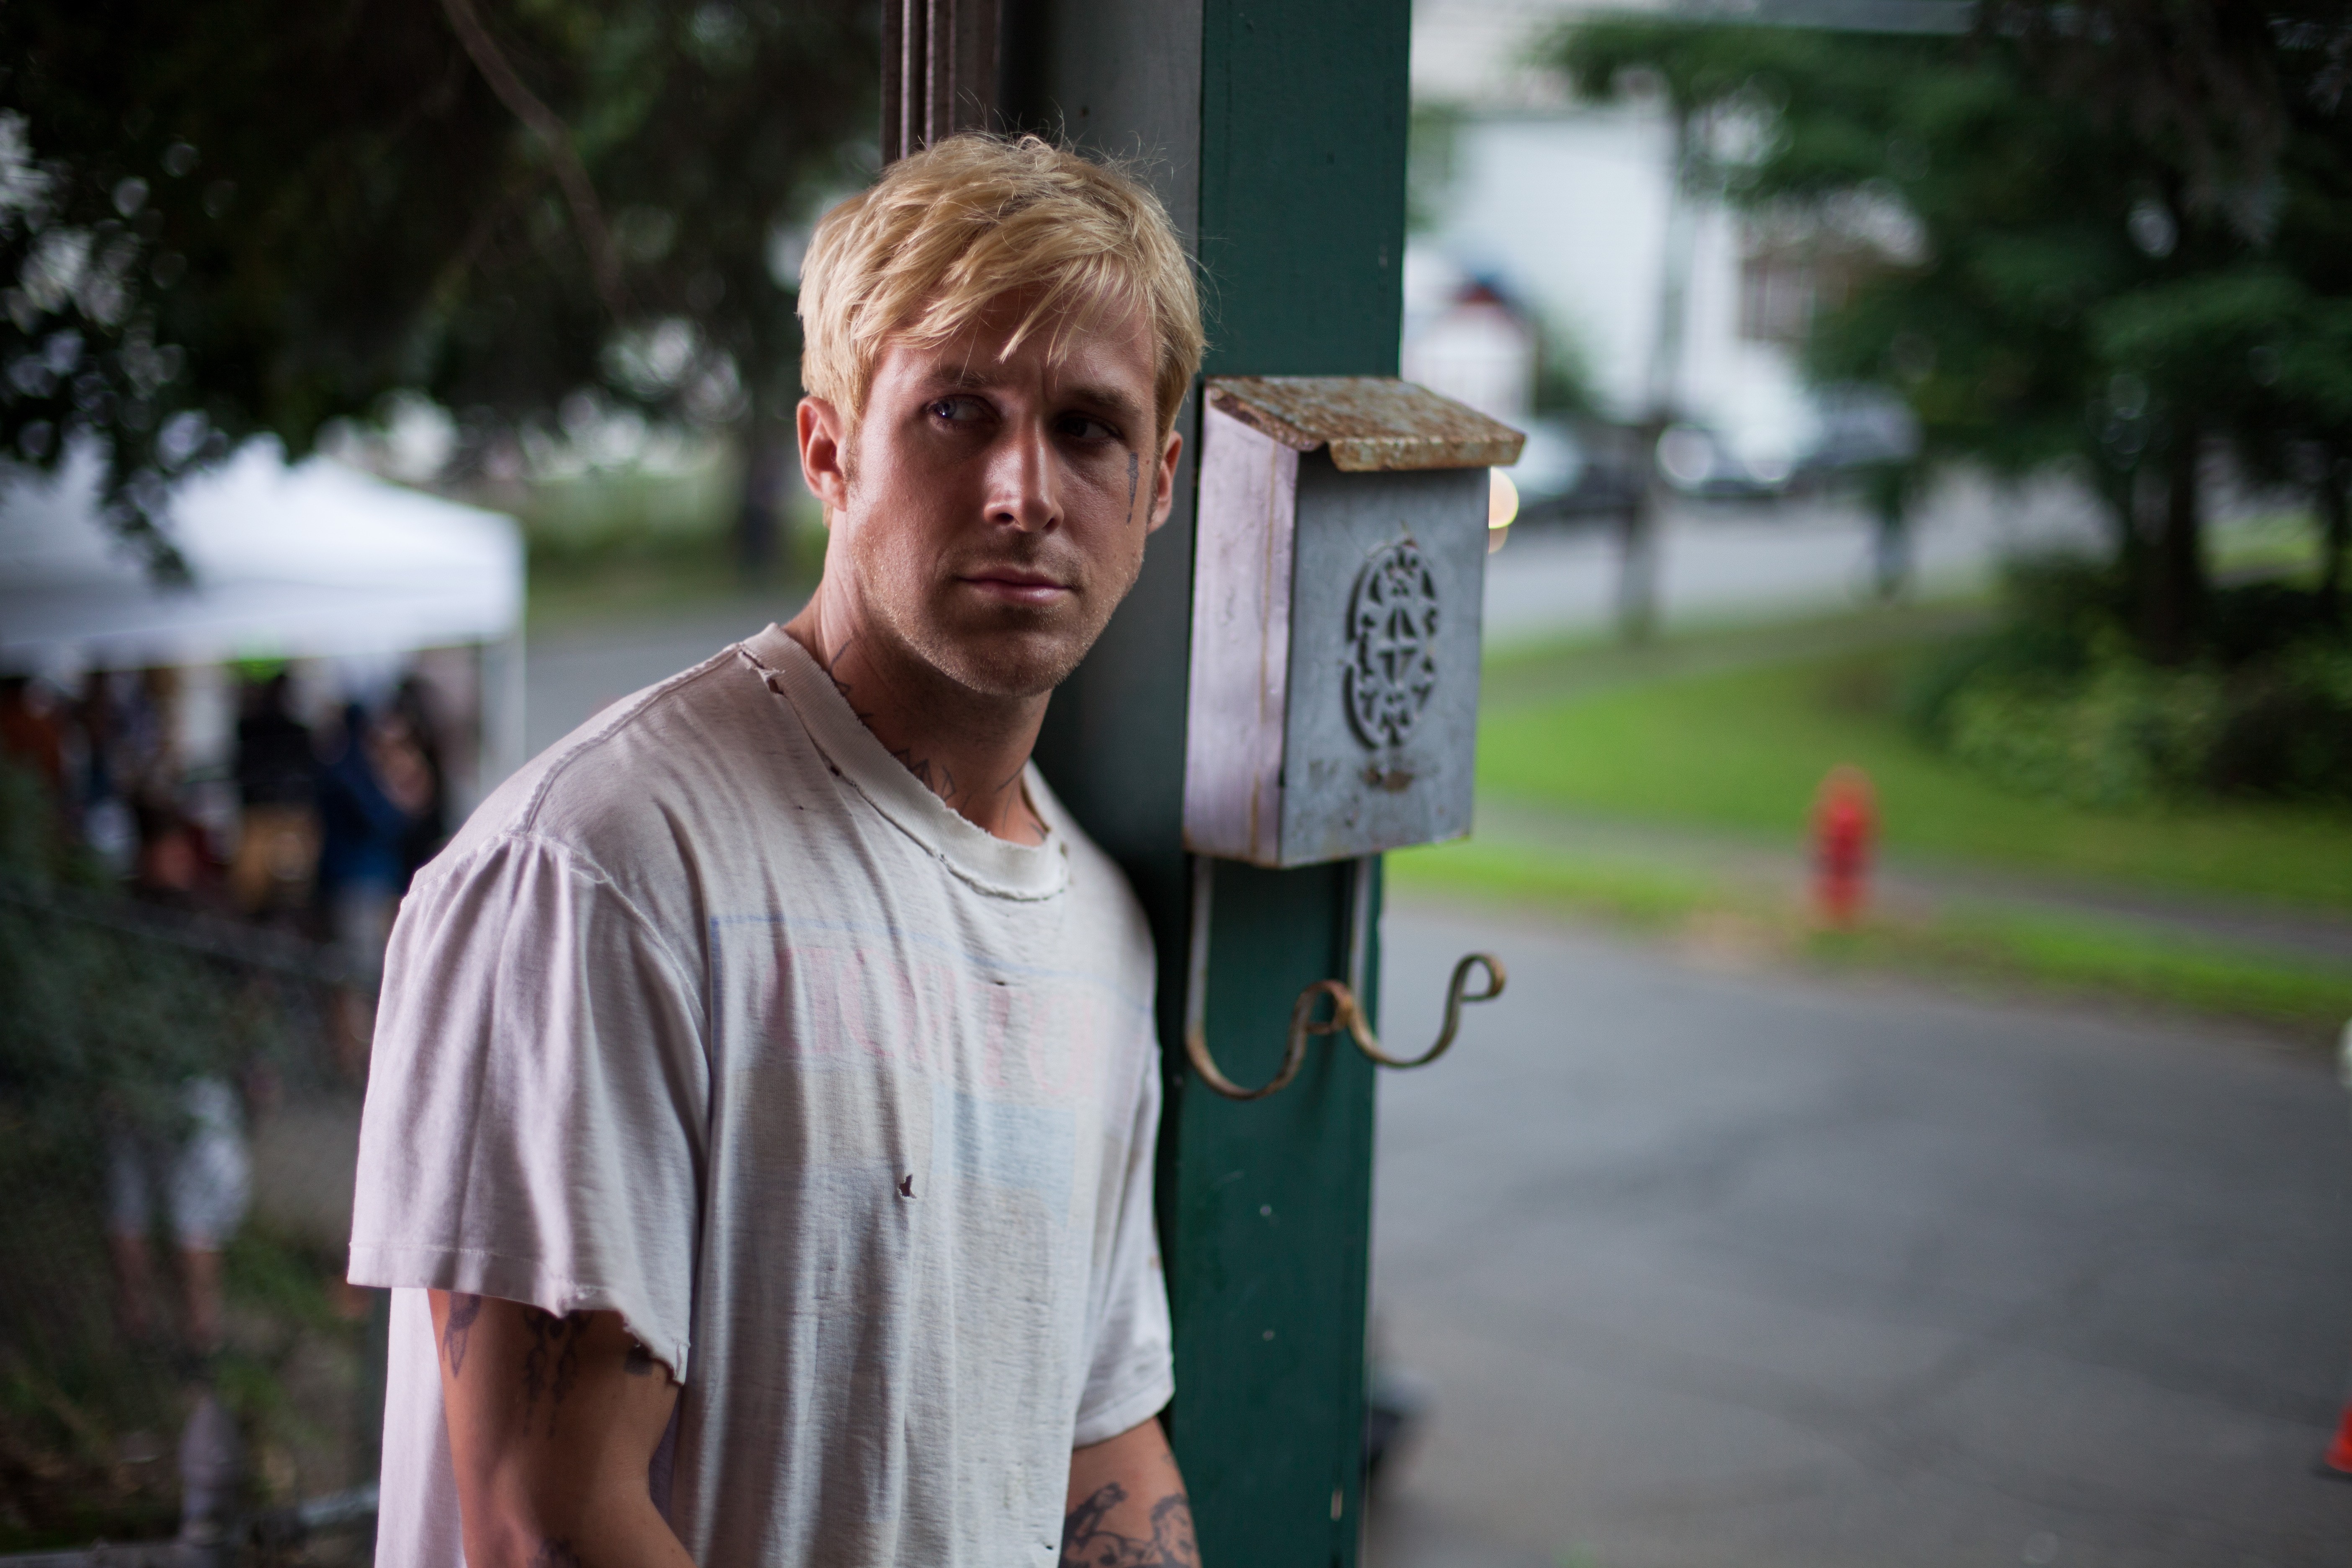 The Place Beyond the Pines 4k Ultra HD Wallpaper